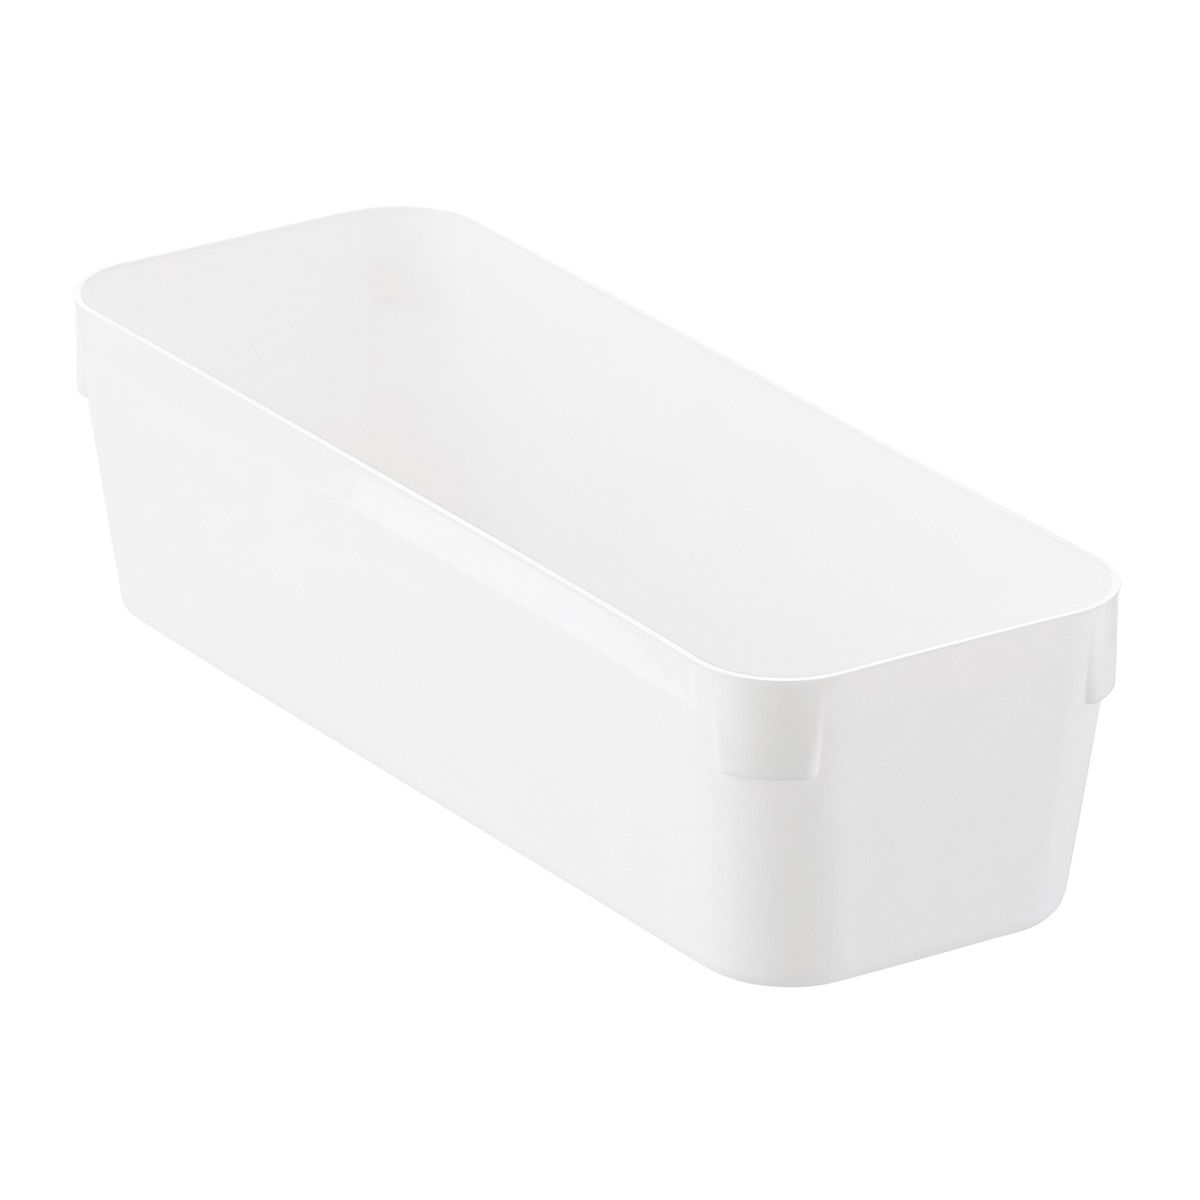 3-Tier Cart Small Organizer Tray White | The Container Store